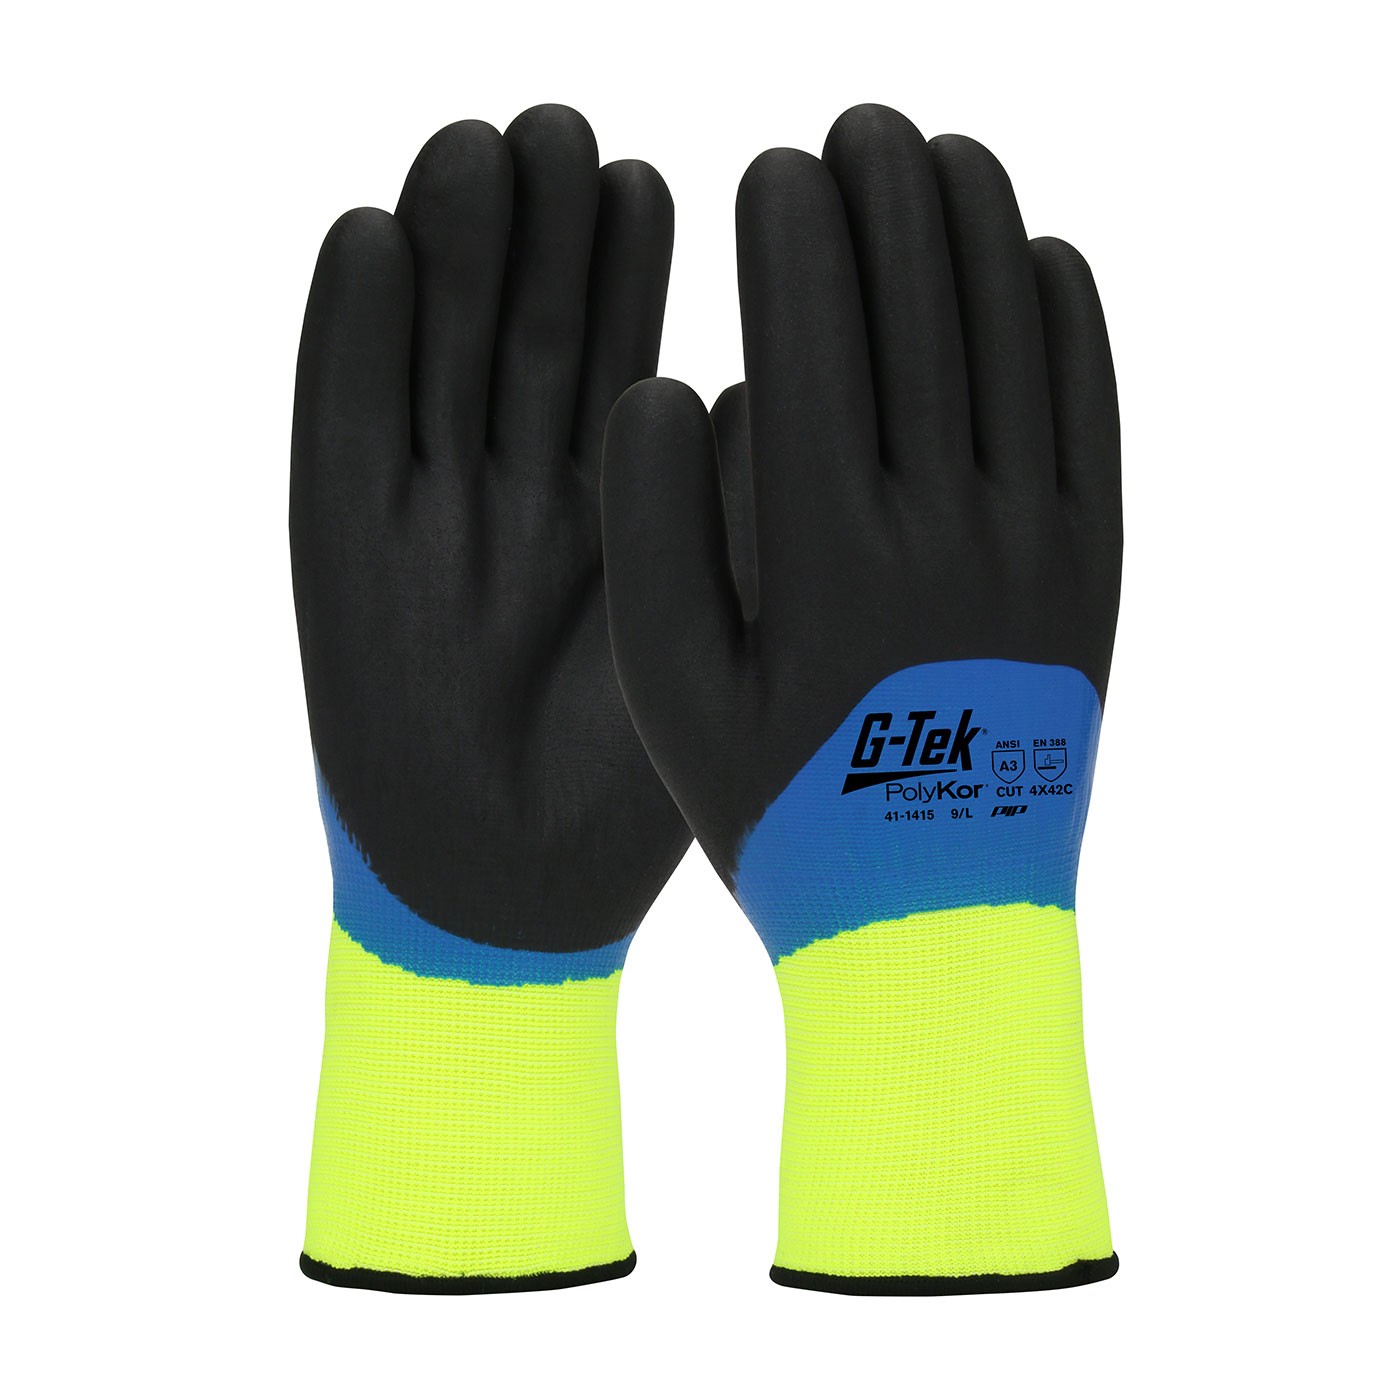 G-Tek® PolyKor® Hi-Vis Seamless Knit PolyKor® Blended Glove with Acrylic Liner and Double-Dipped Nitrile Coated Foam Grip on Full Hand  (#41-1415)